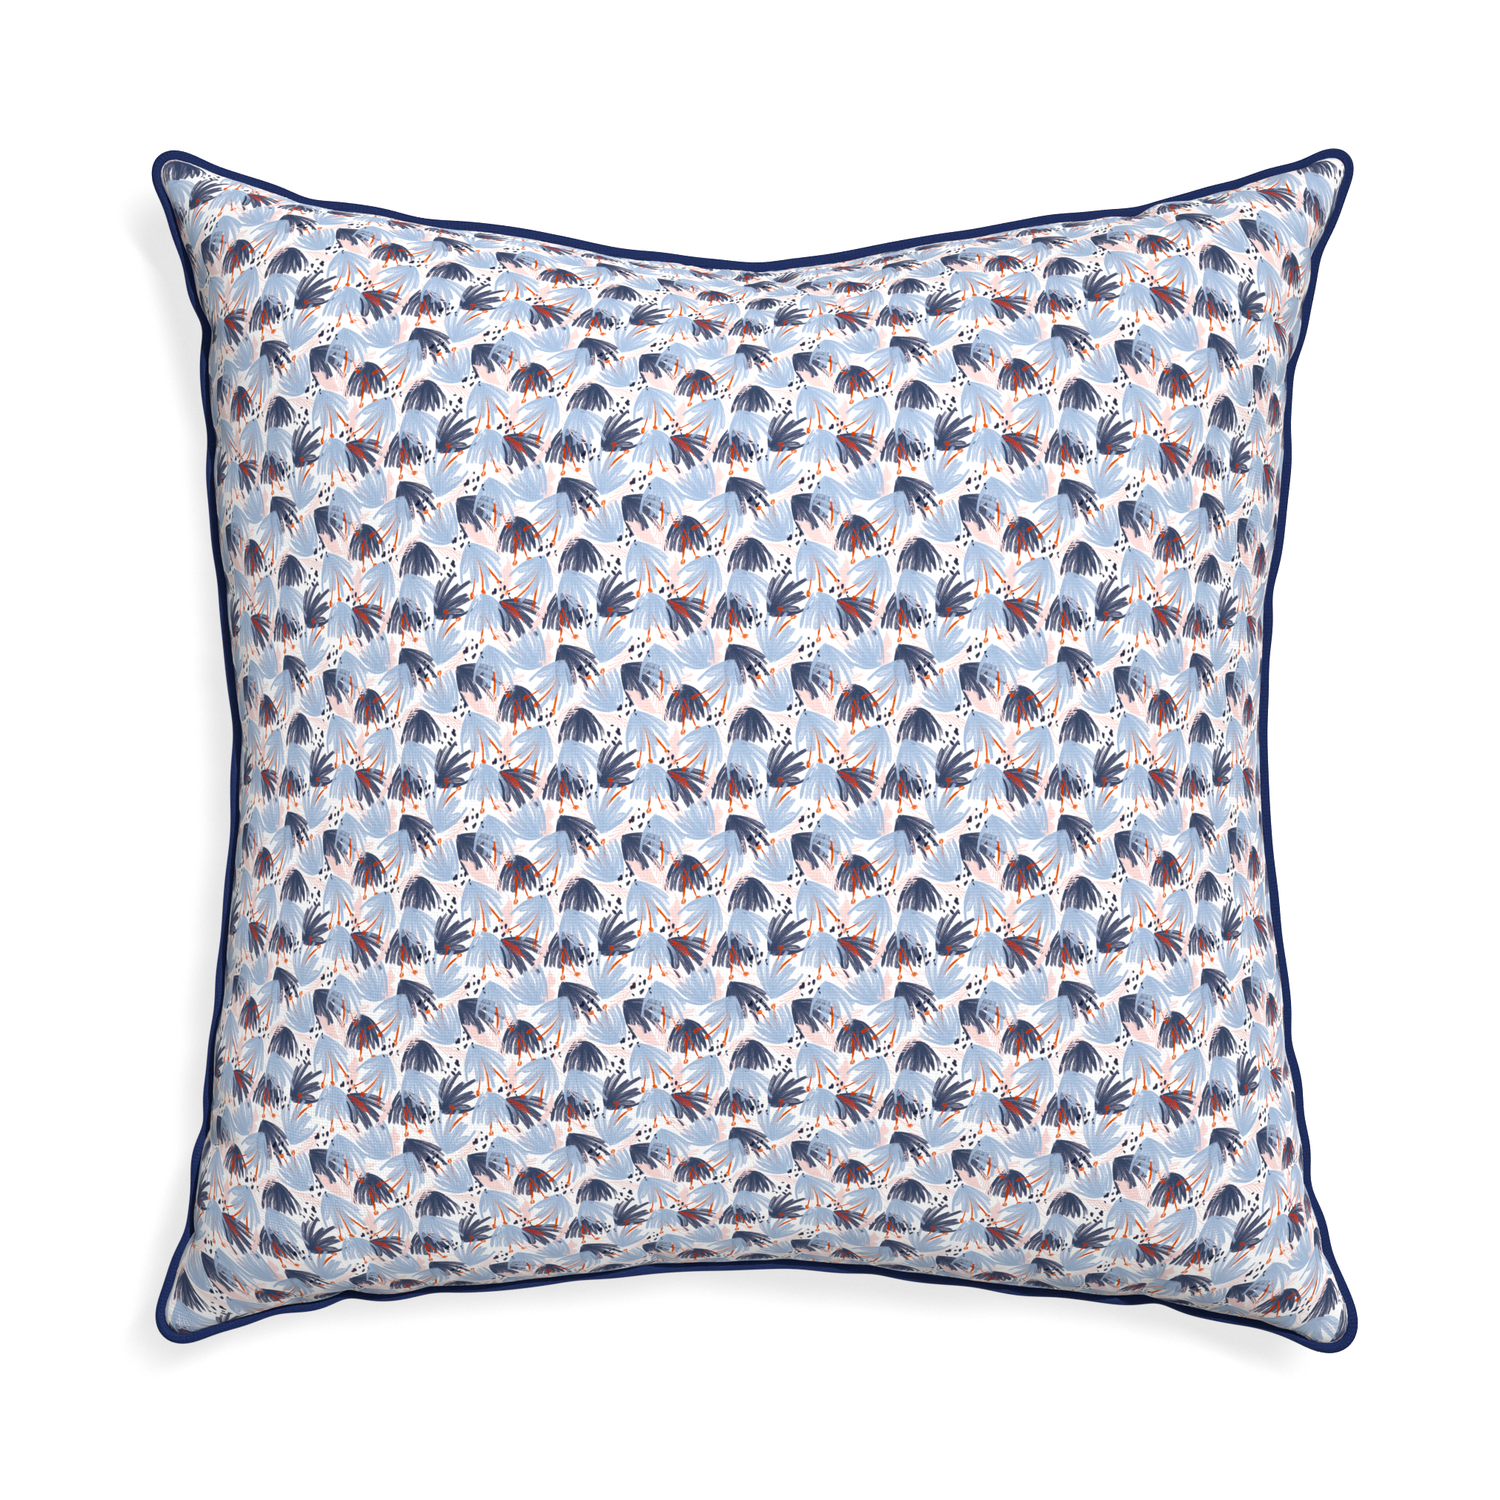 Euro-sham eden blue custom pillow with midnight piping on white background